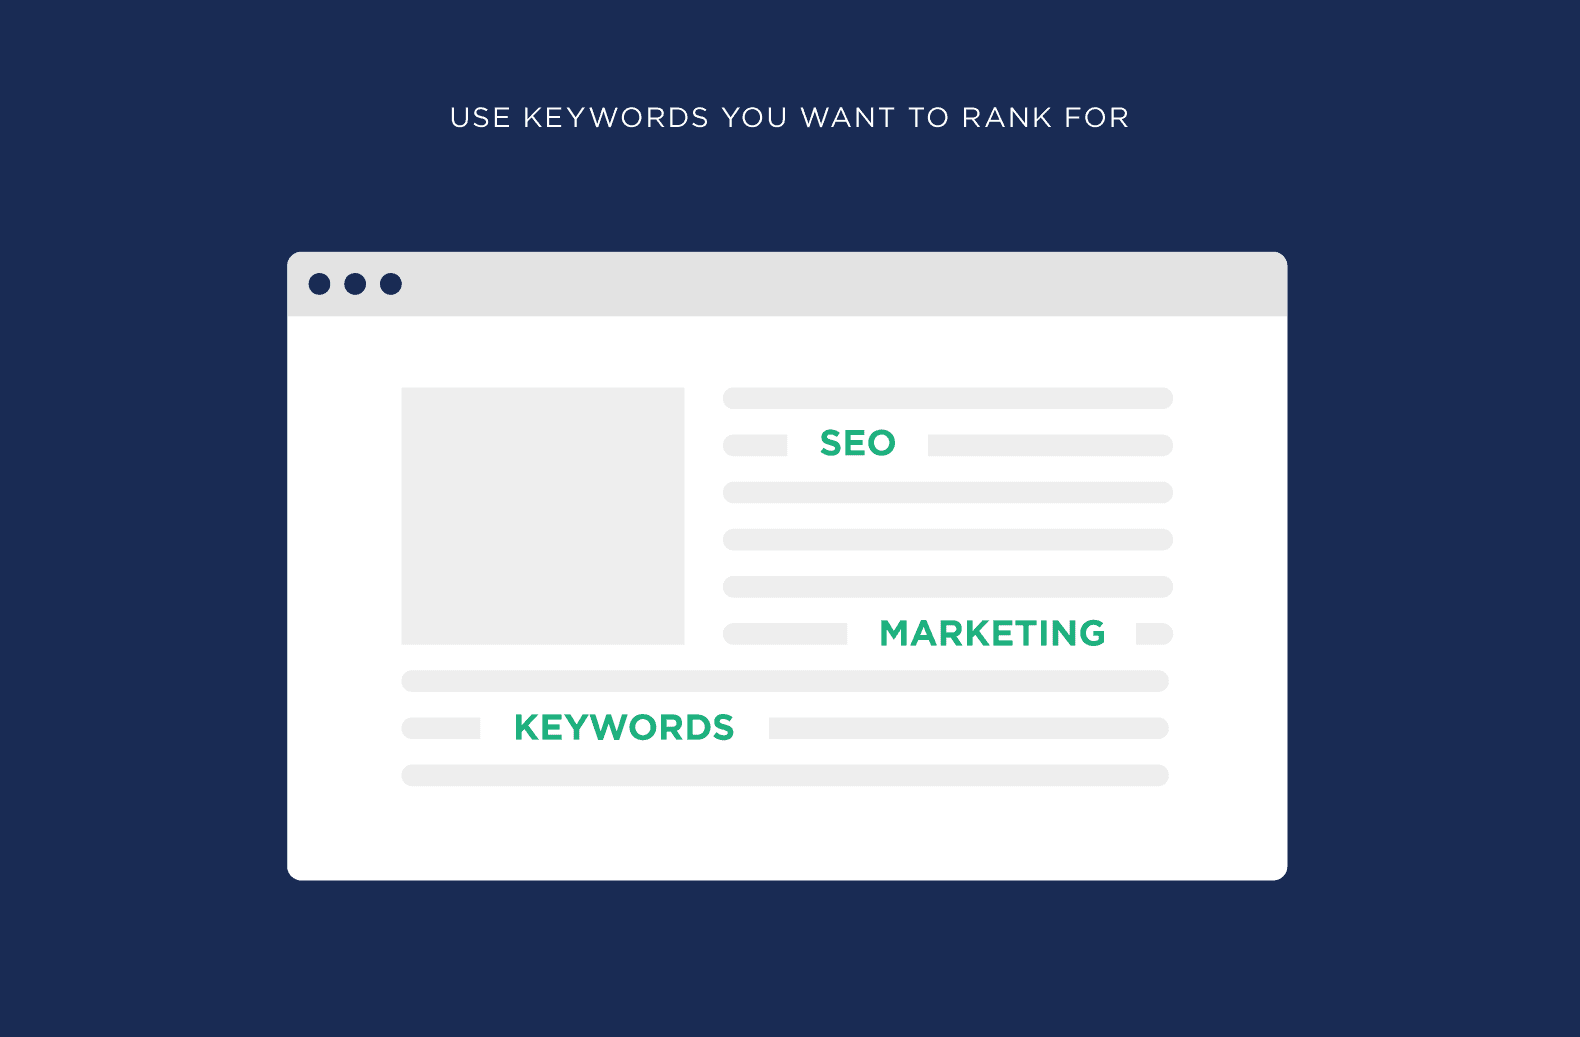 Use keywords you want to rank for